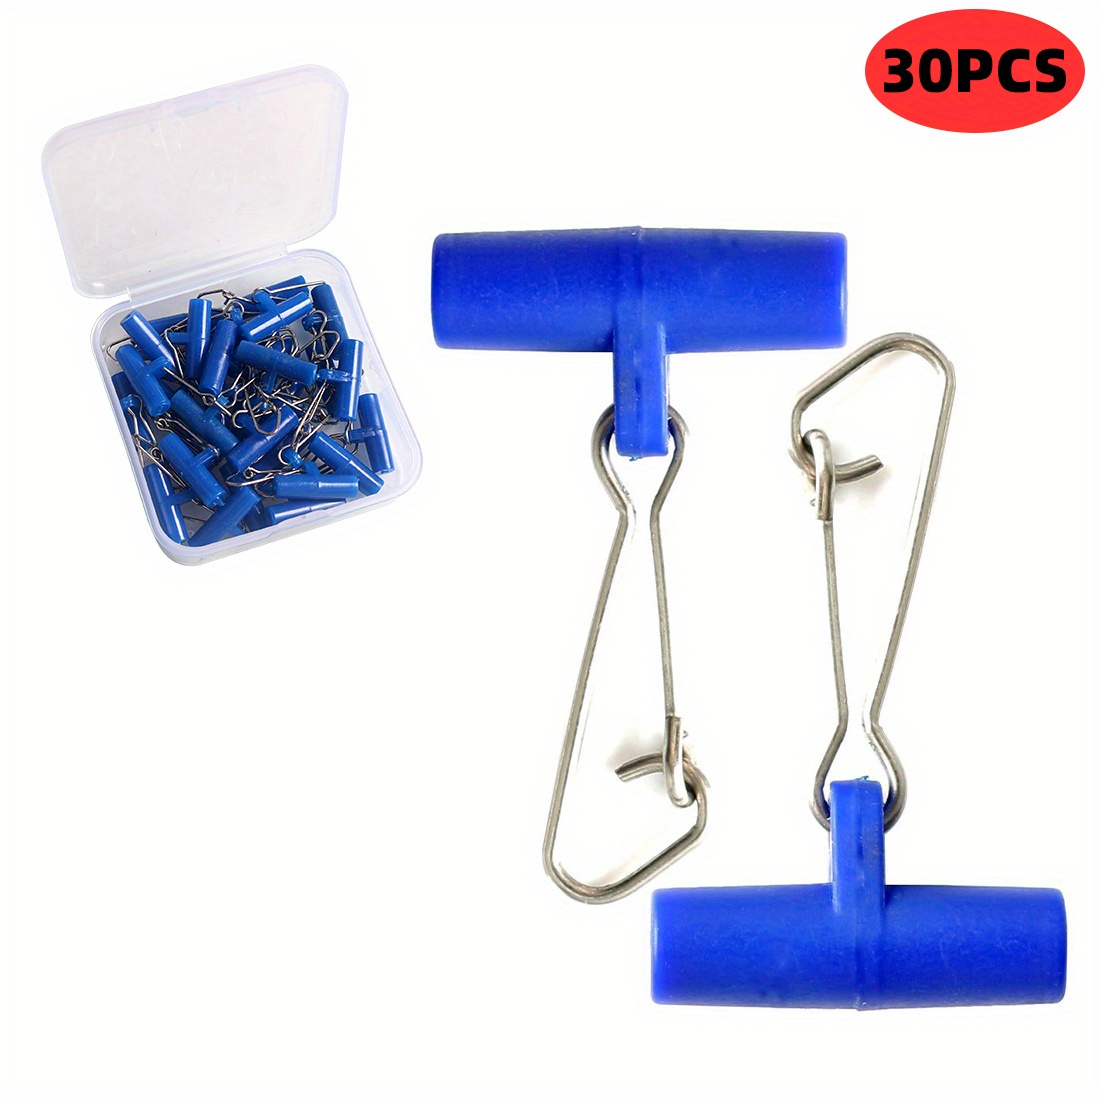 30pcs Fishing Gear Accessories: Sinker Slides With Hooked Snap & Line  Connectors - Get Ready for a Big Catch!